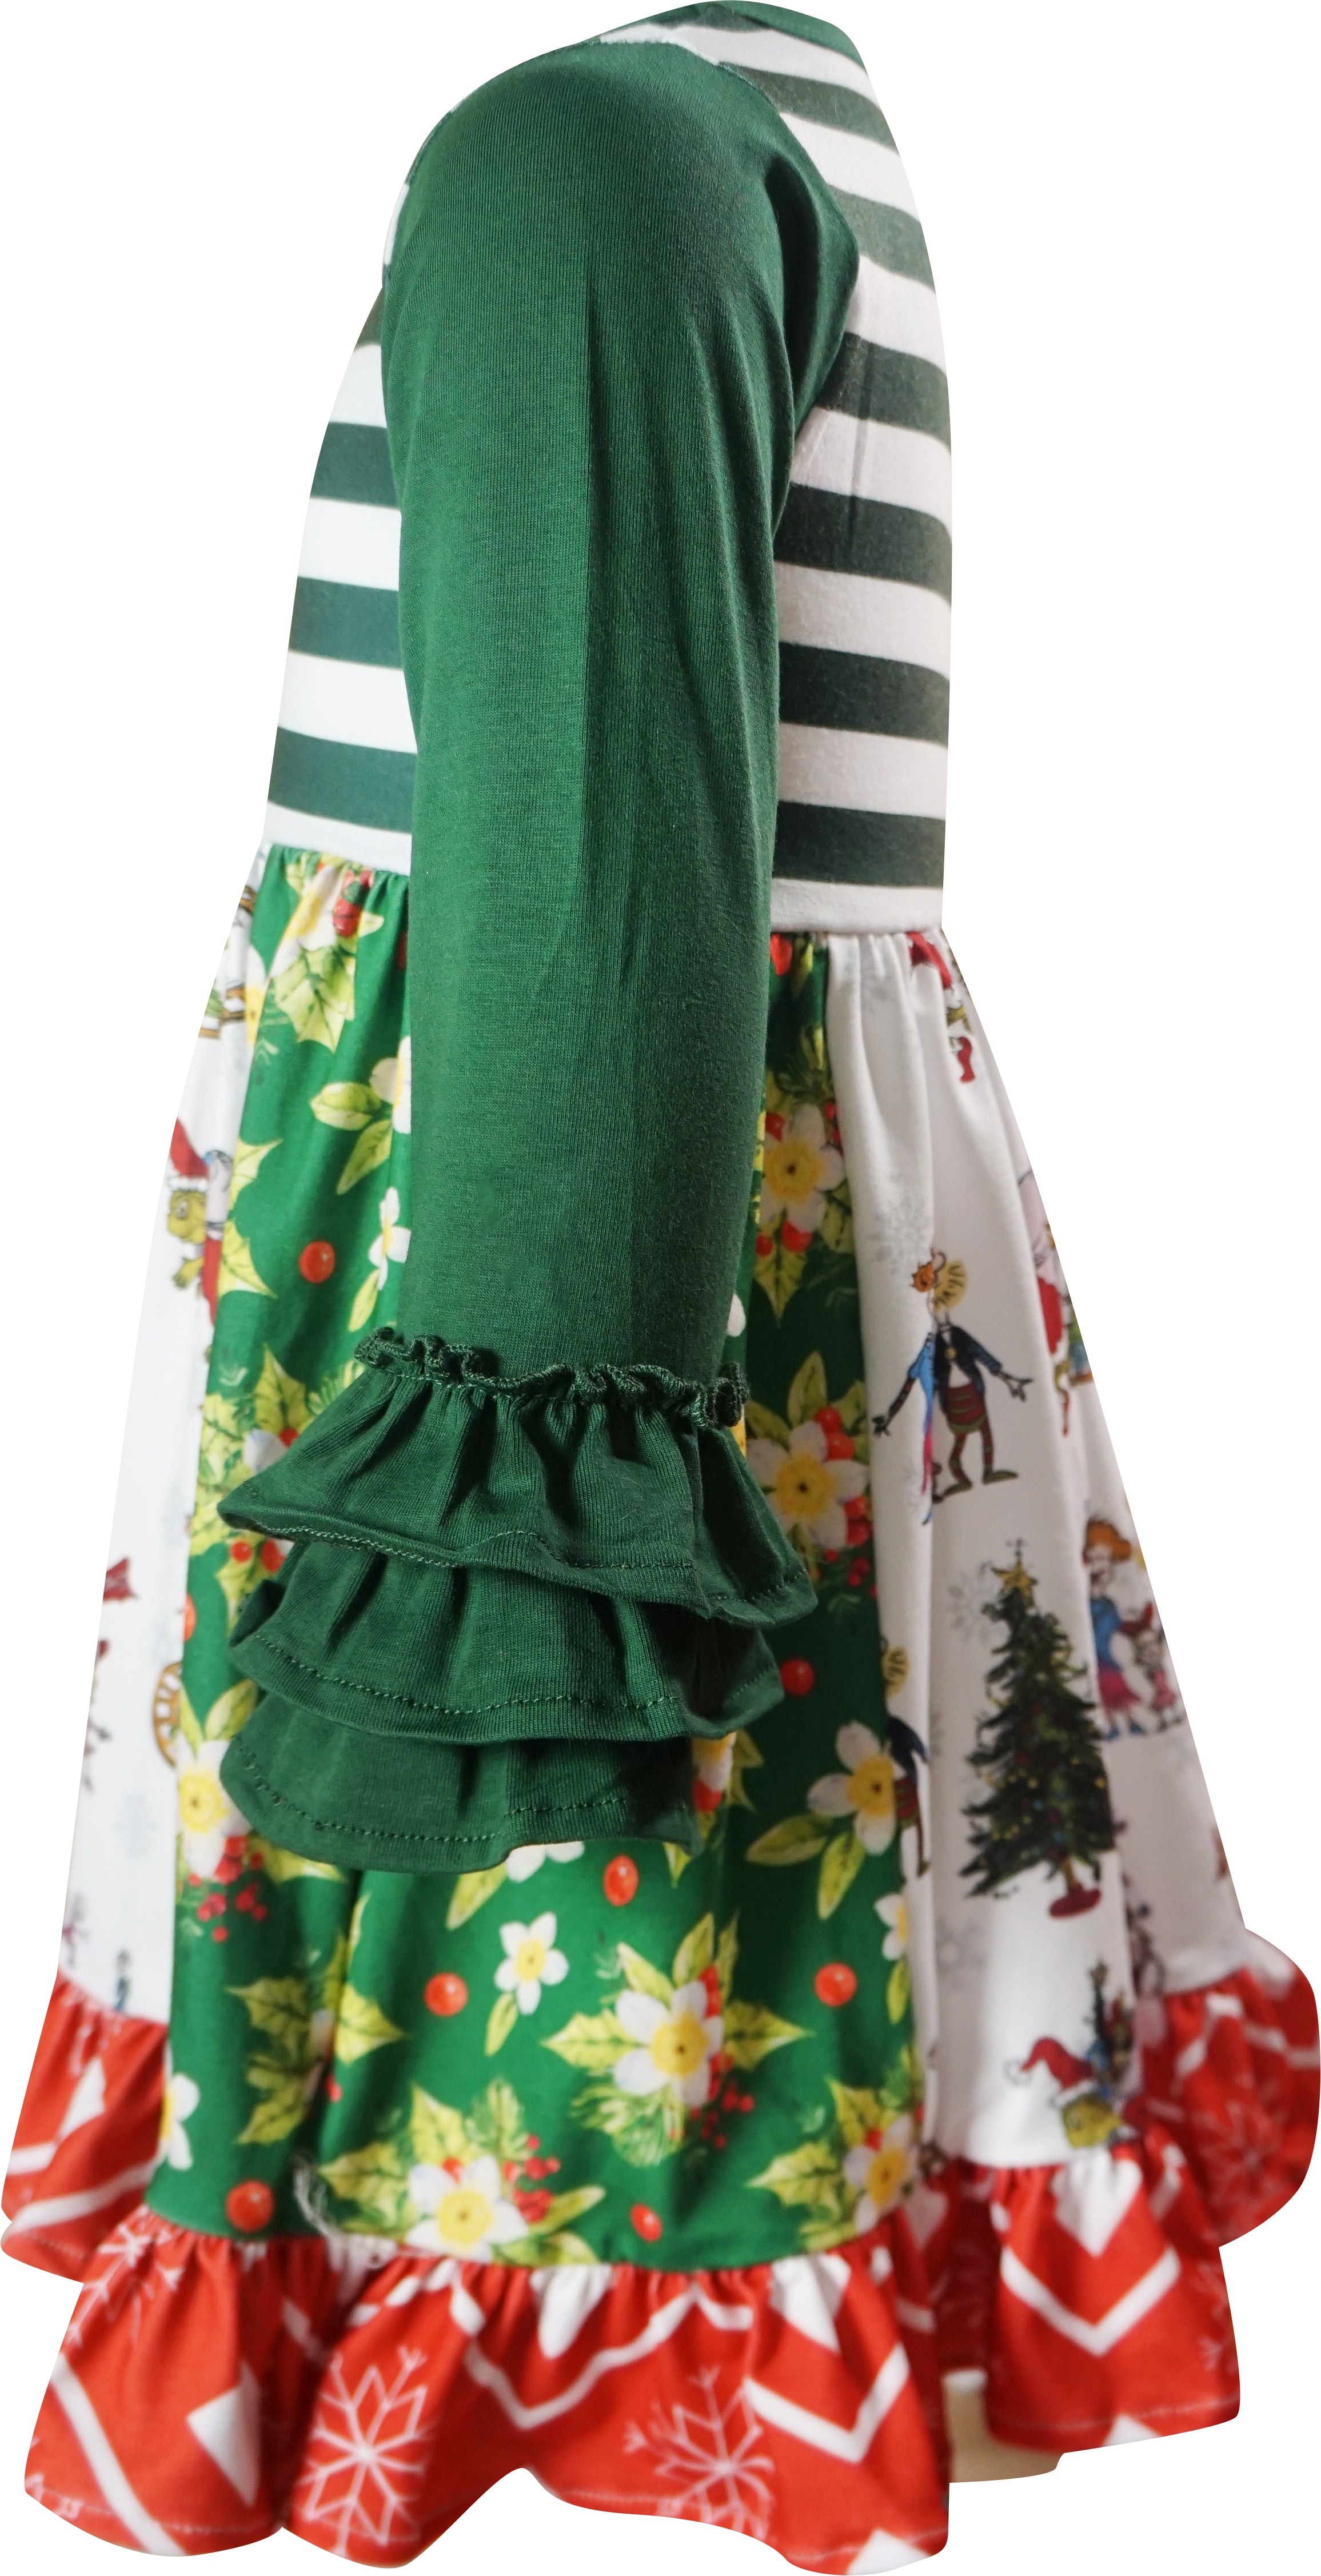 Baby Toddler Little Girls Merry Christmas Grinch Cindy Lou Inspired Ruffle Skirted Top & Pants Set-Green Stripes